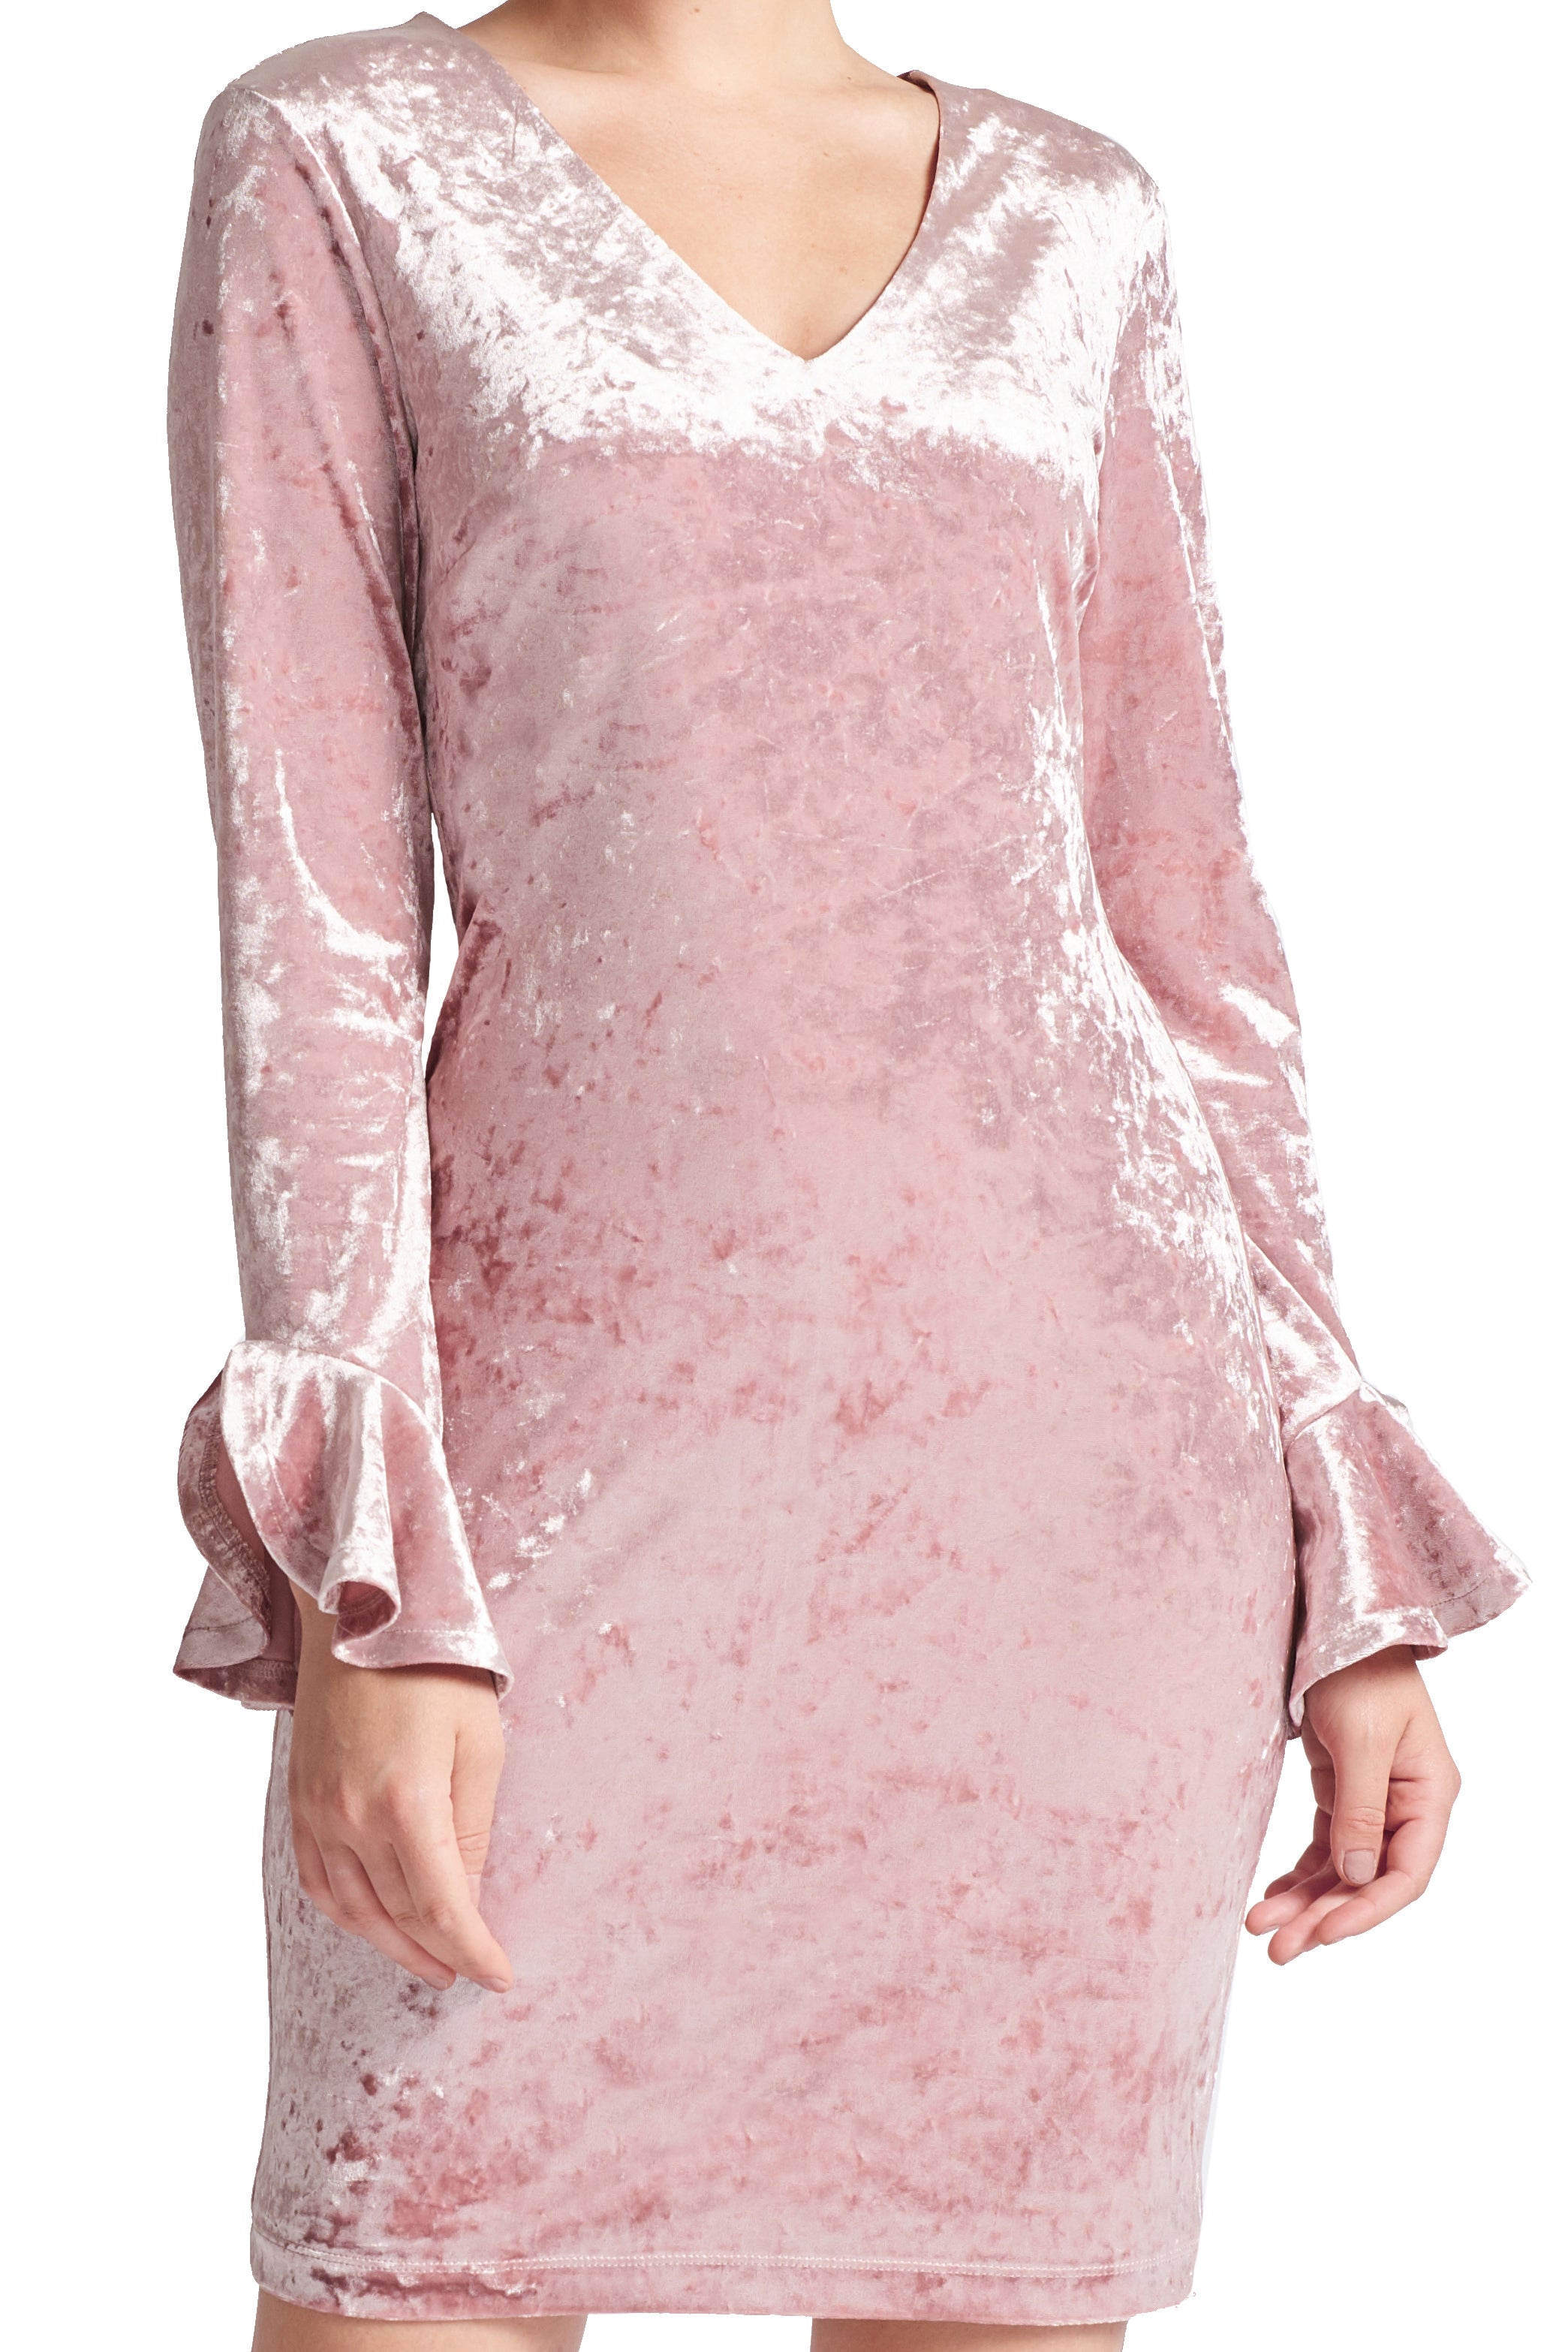 Close-up view of model wearing the Simona Maghen Kara Dress, blush pink stretch velvet short dress with v-neckline, long sleeves & bell sleeves.